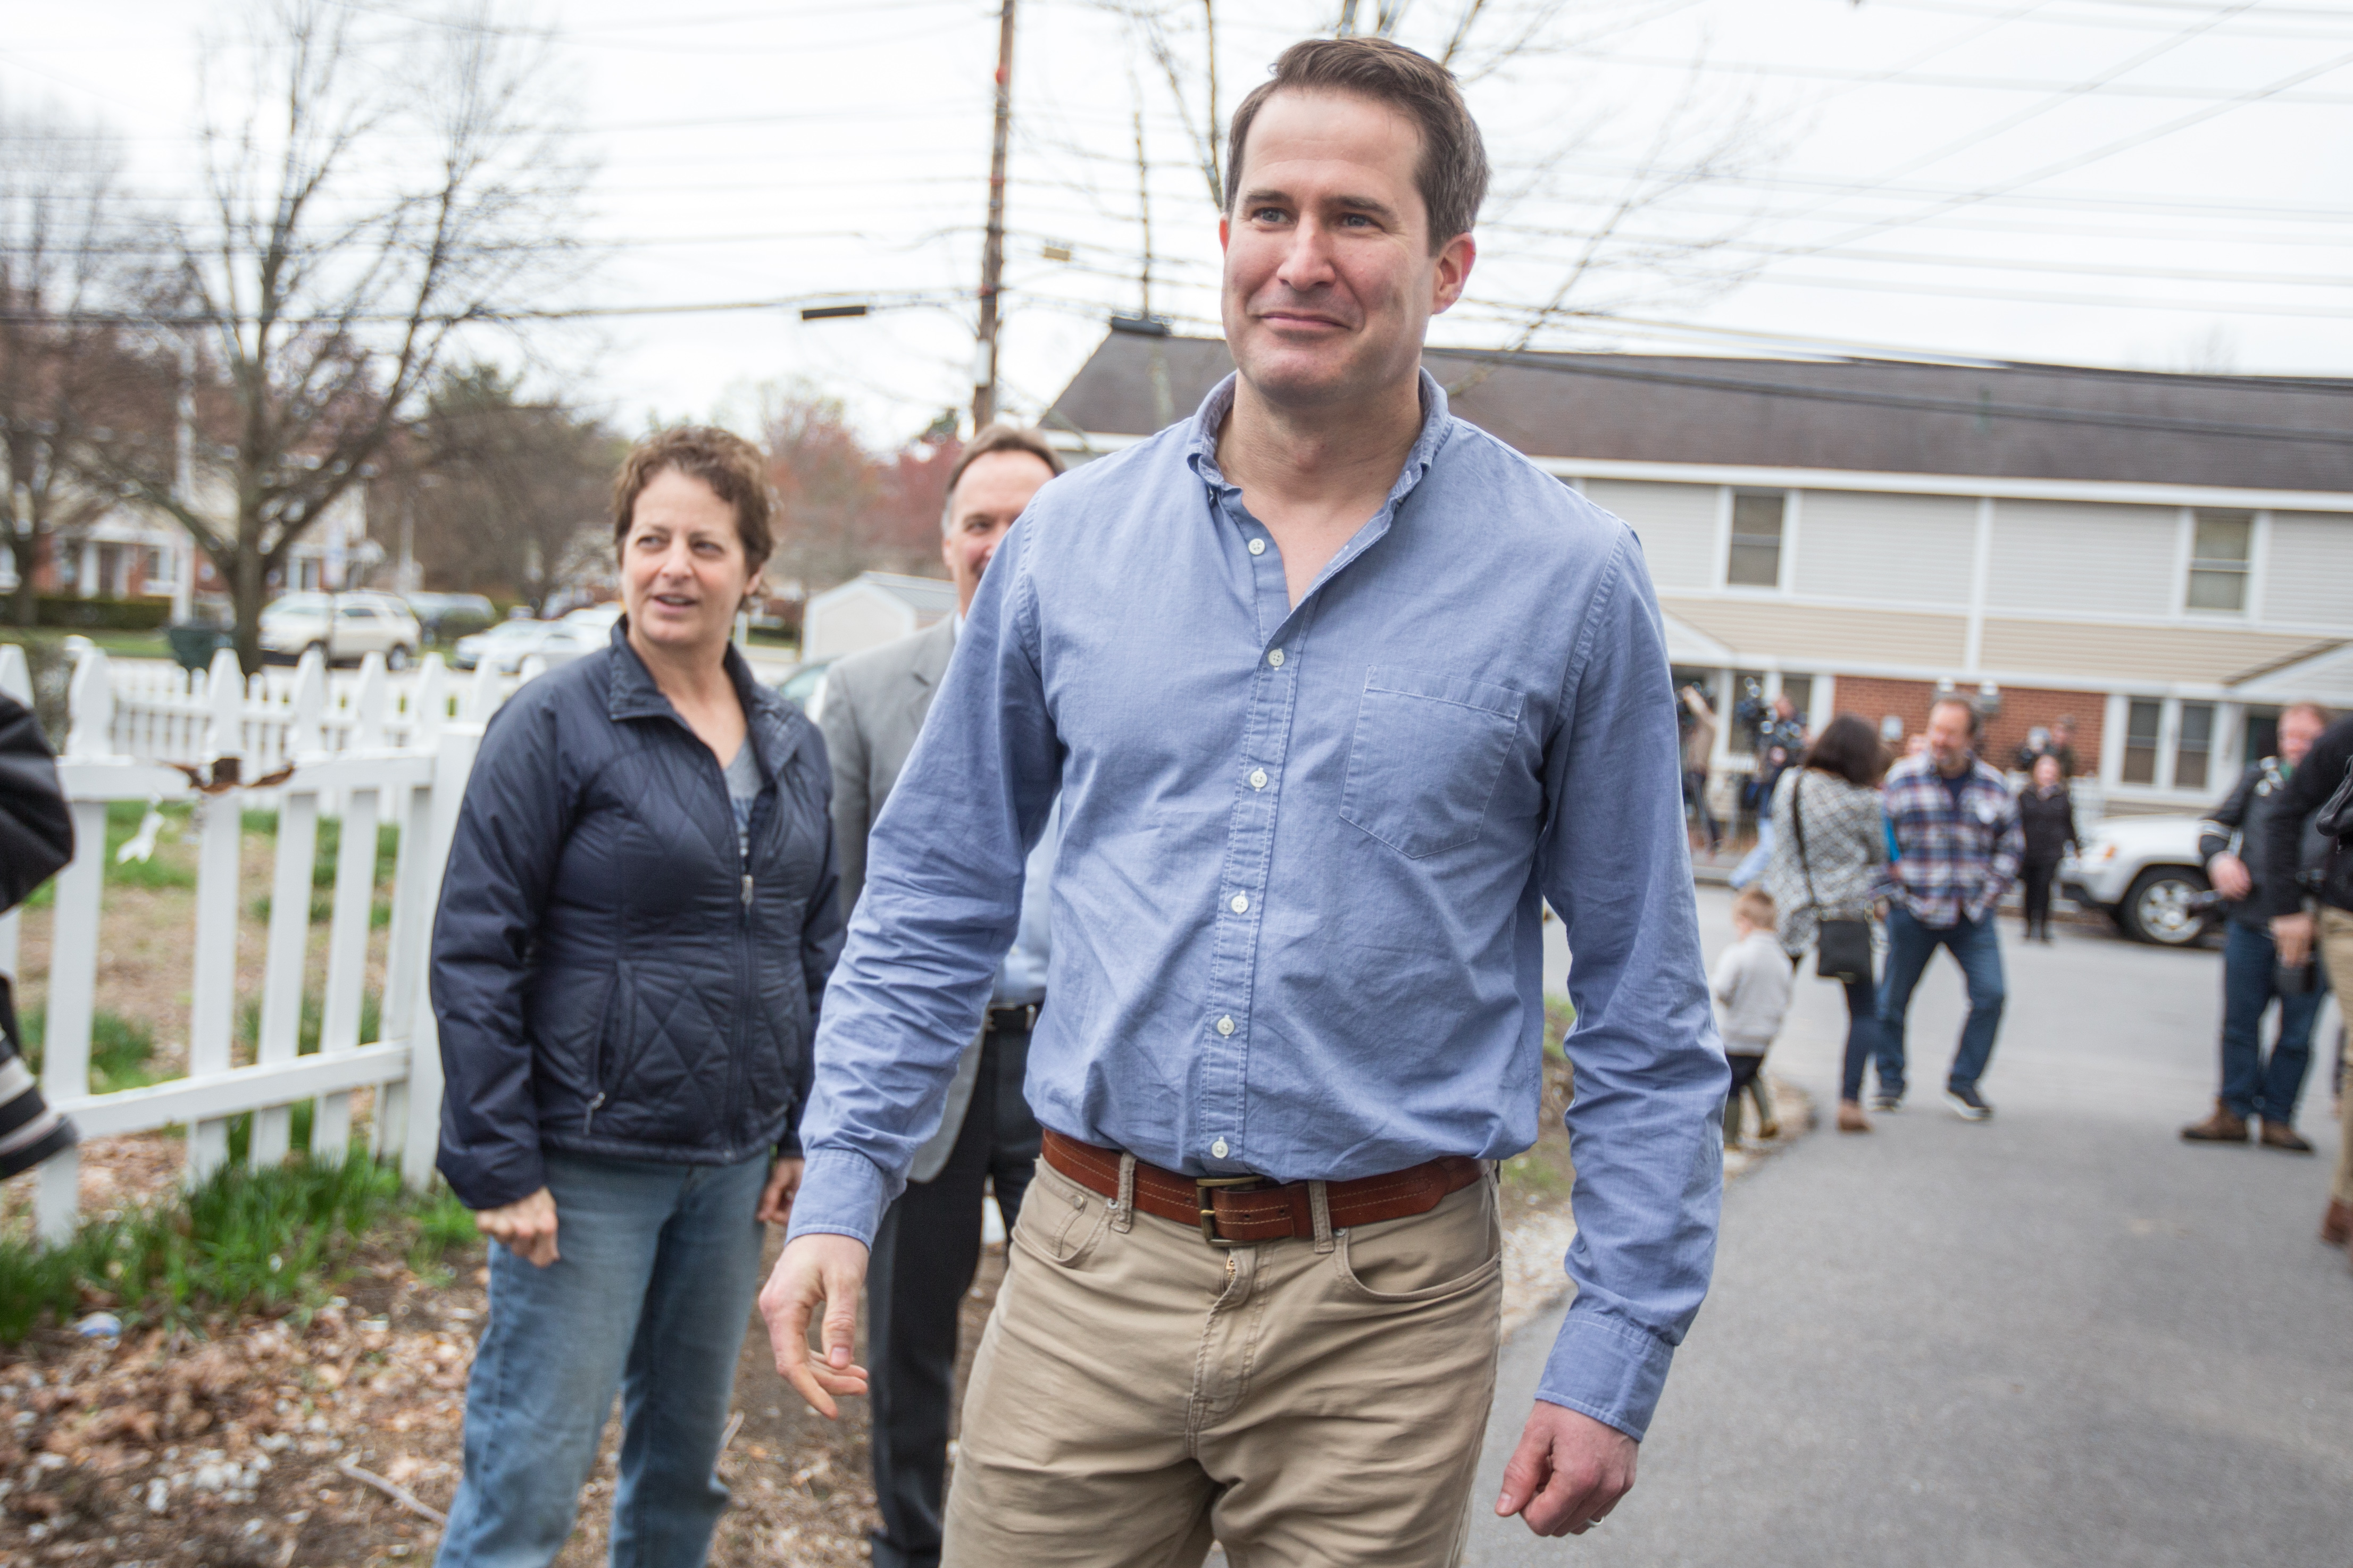 Rep. Seth Moulton Begins Presidential Campaign With Campaign Event In NH